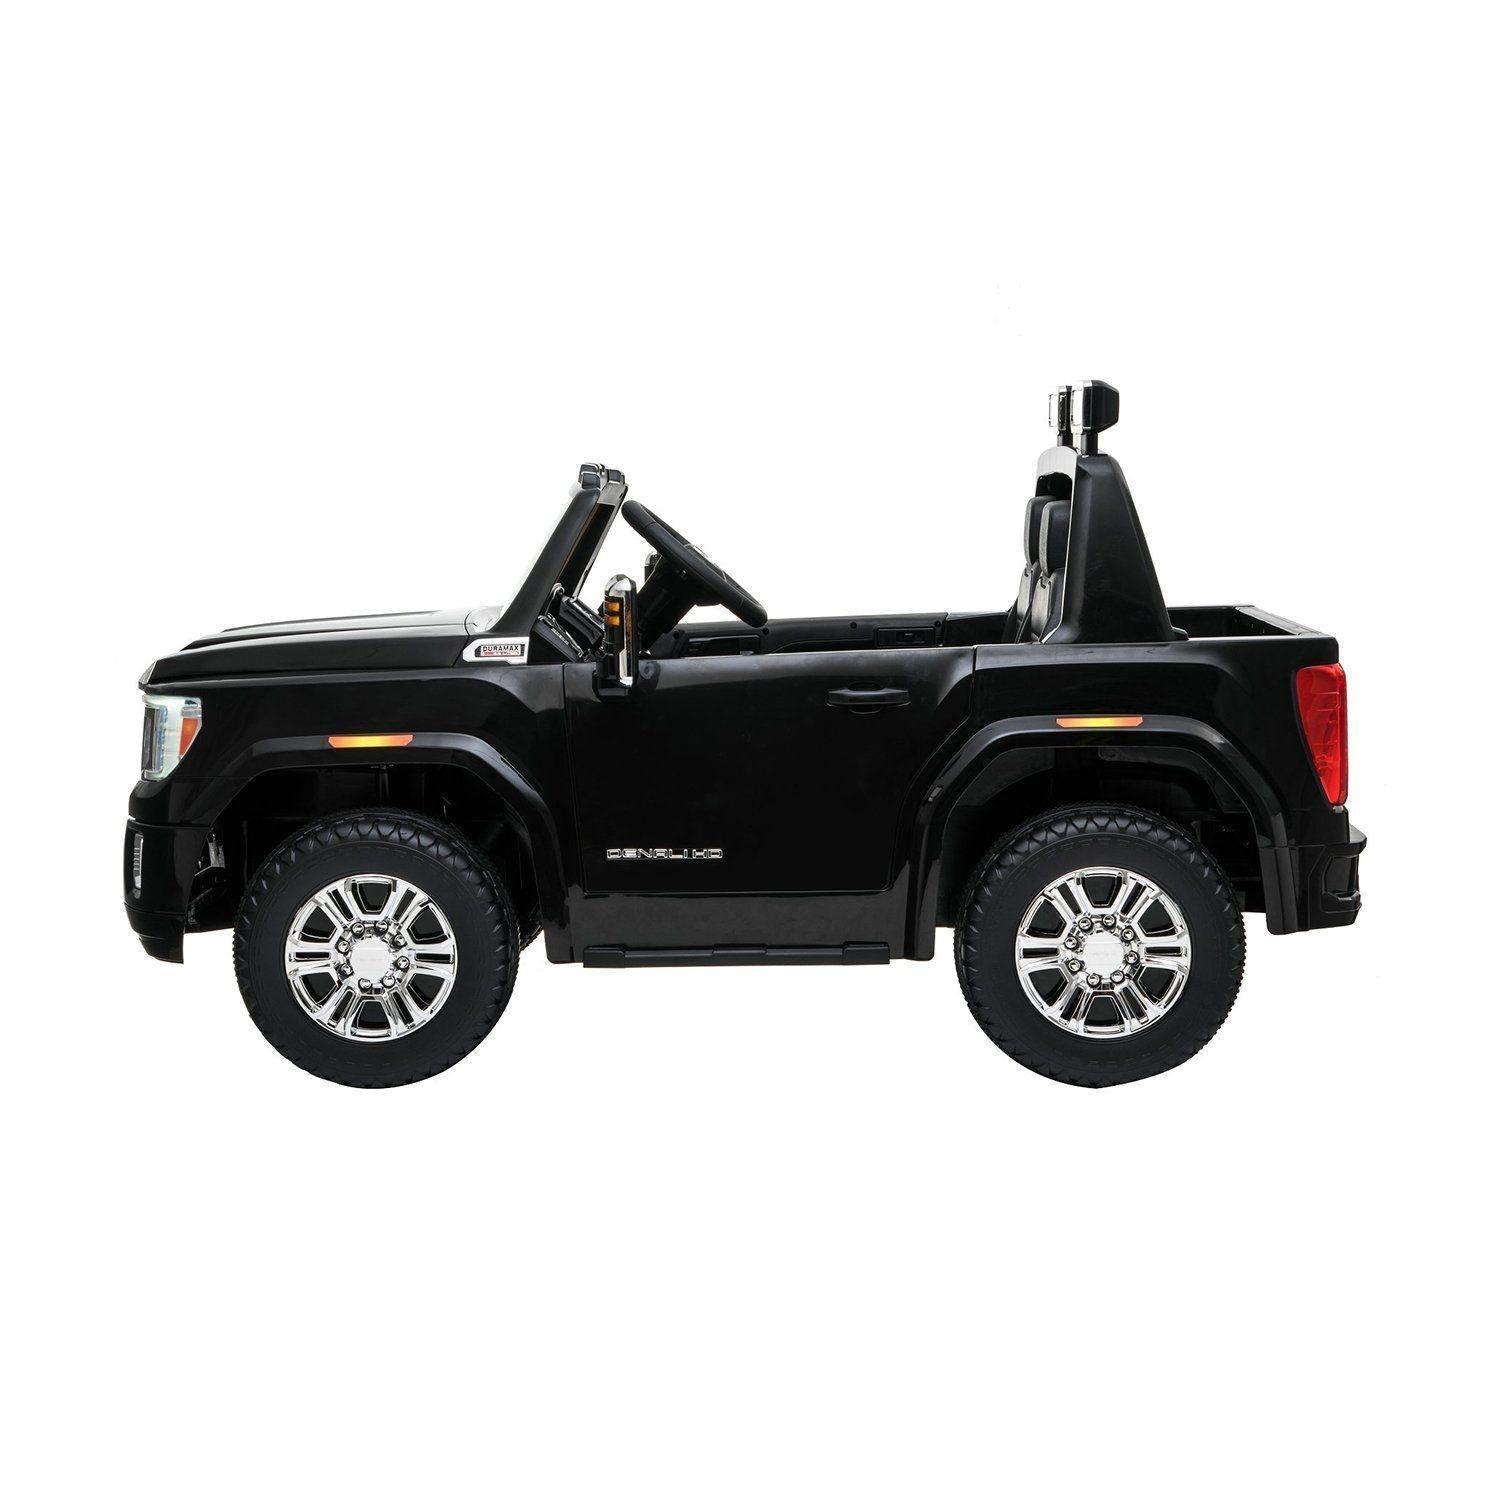 24V GMC Denali 2 Seater Battery Operated Ride on Car with Parental Remote Control - DTI Direct USA